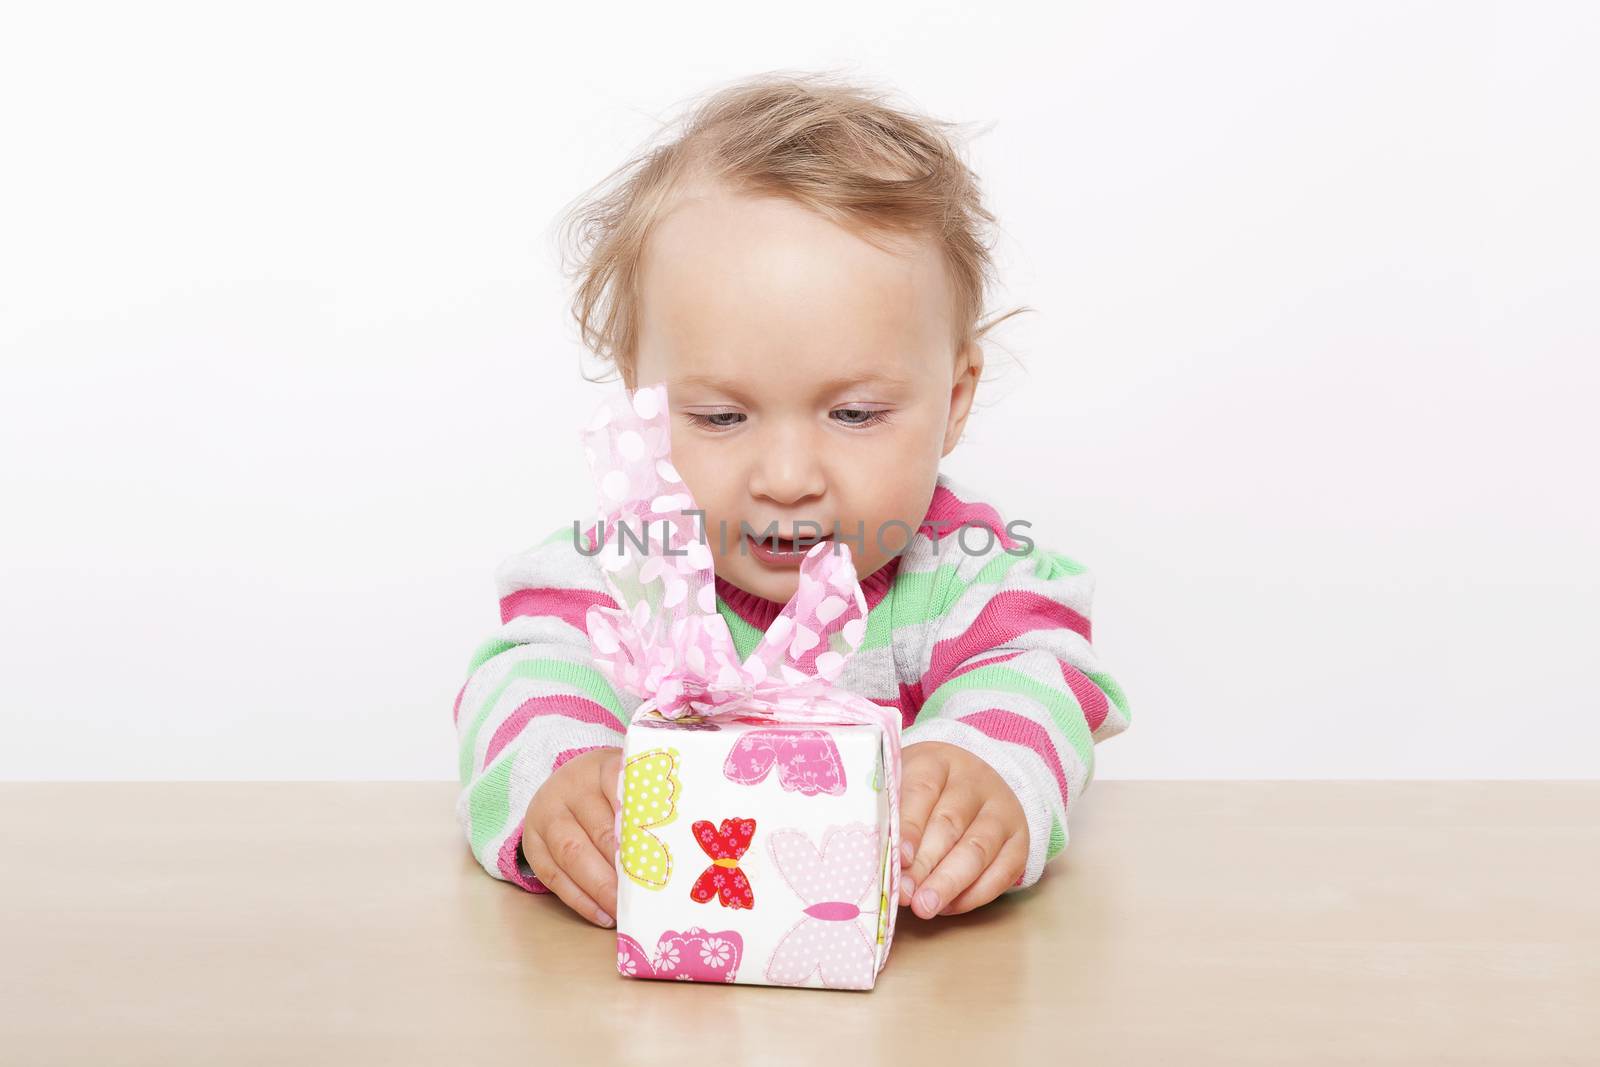 Birthday surprise. Cute baby girl opening present isolated on white background. 